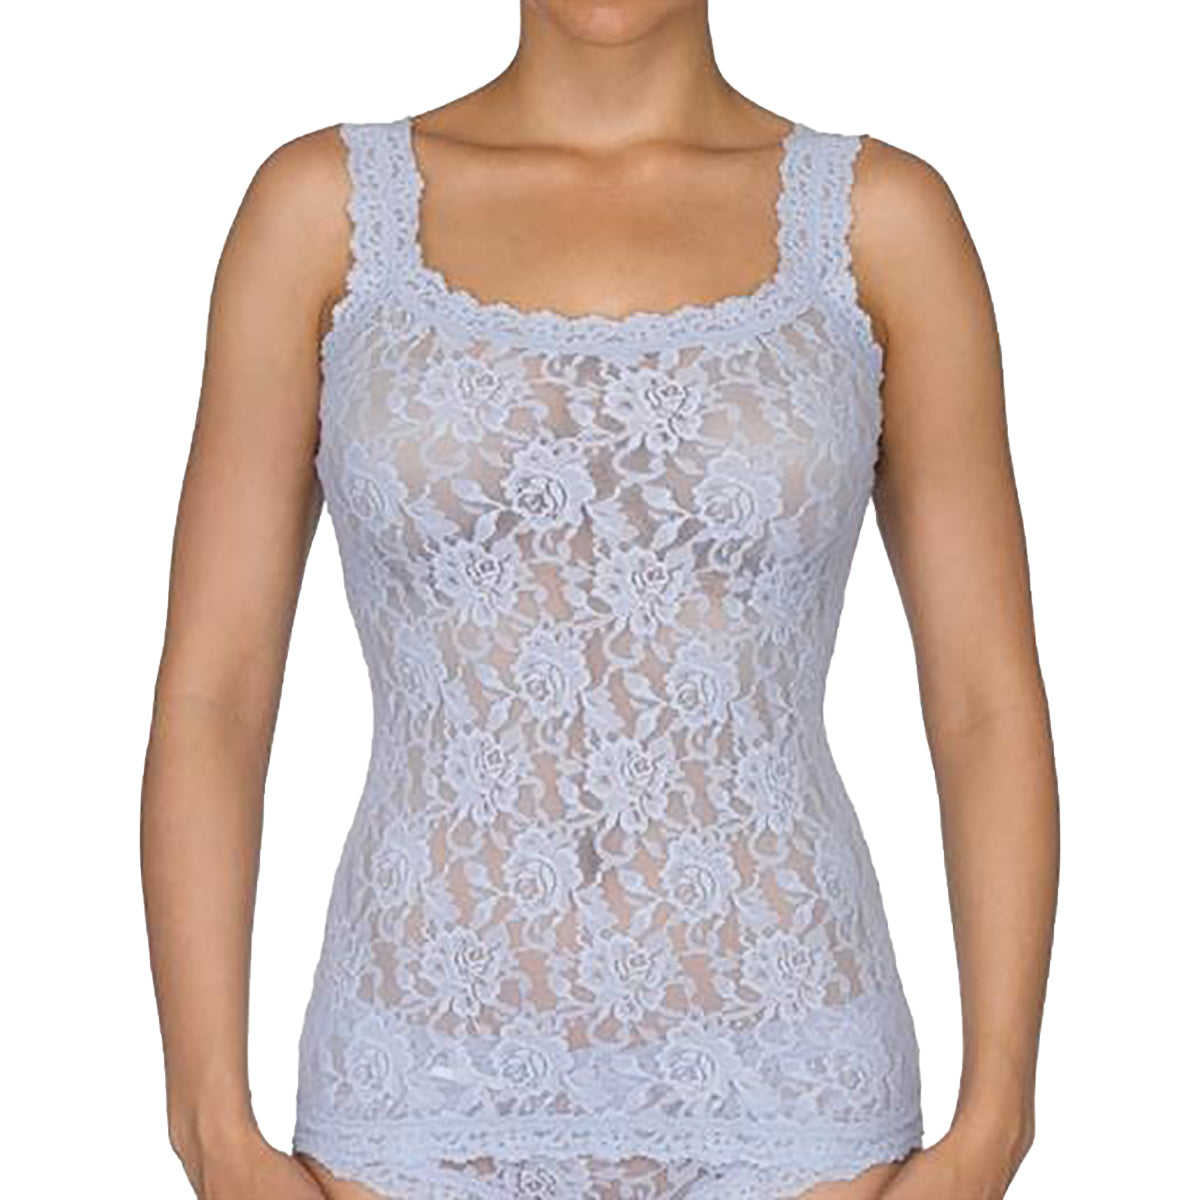 Hanky Panky Signature Lace Unlined Camisole